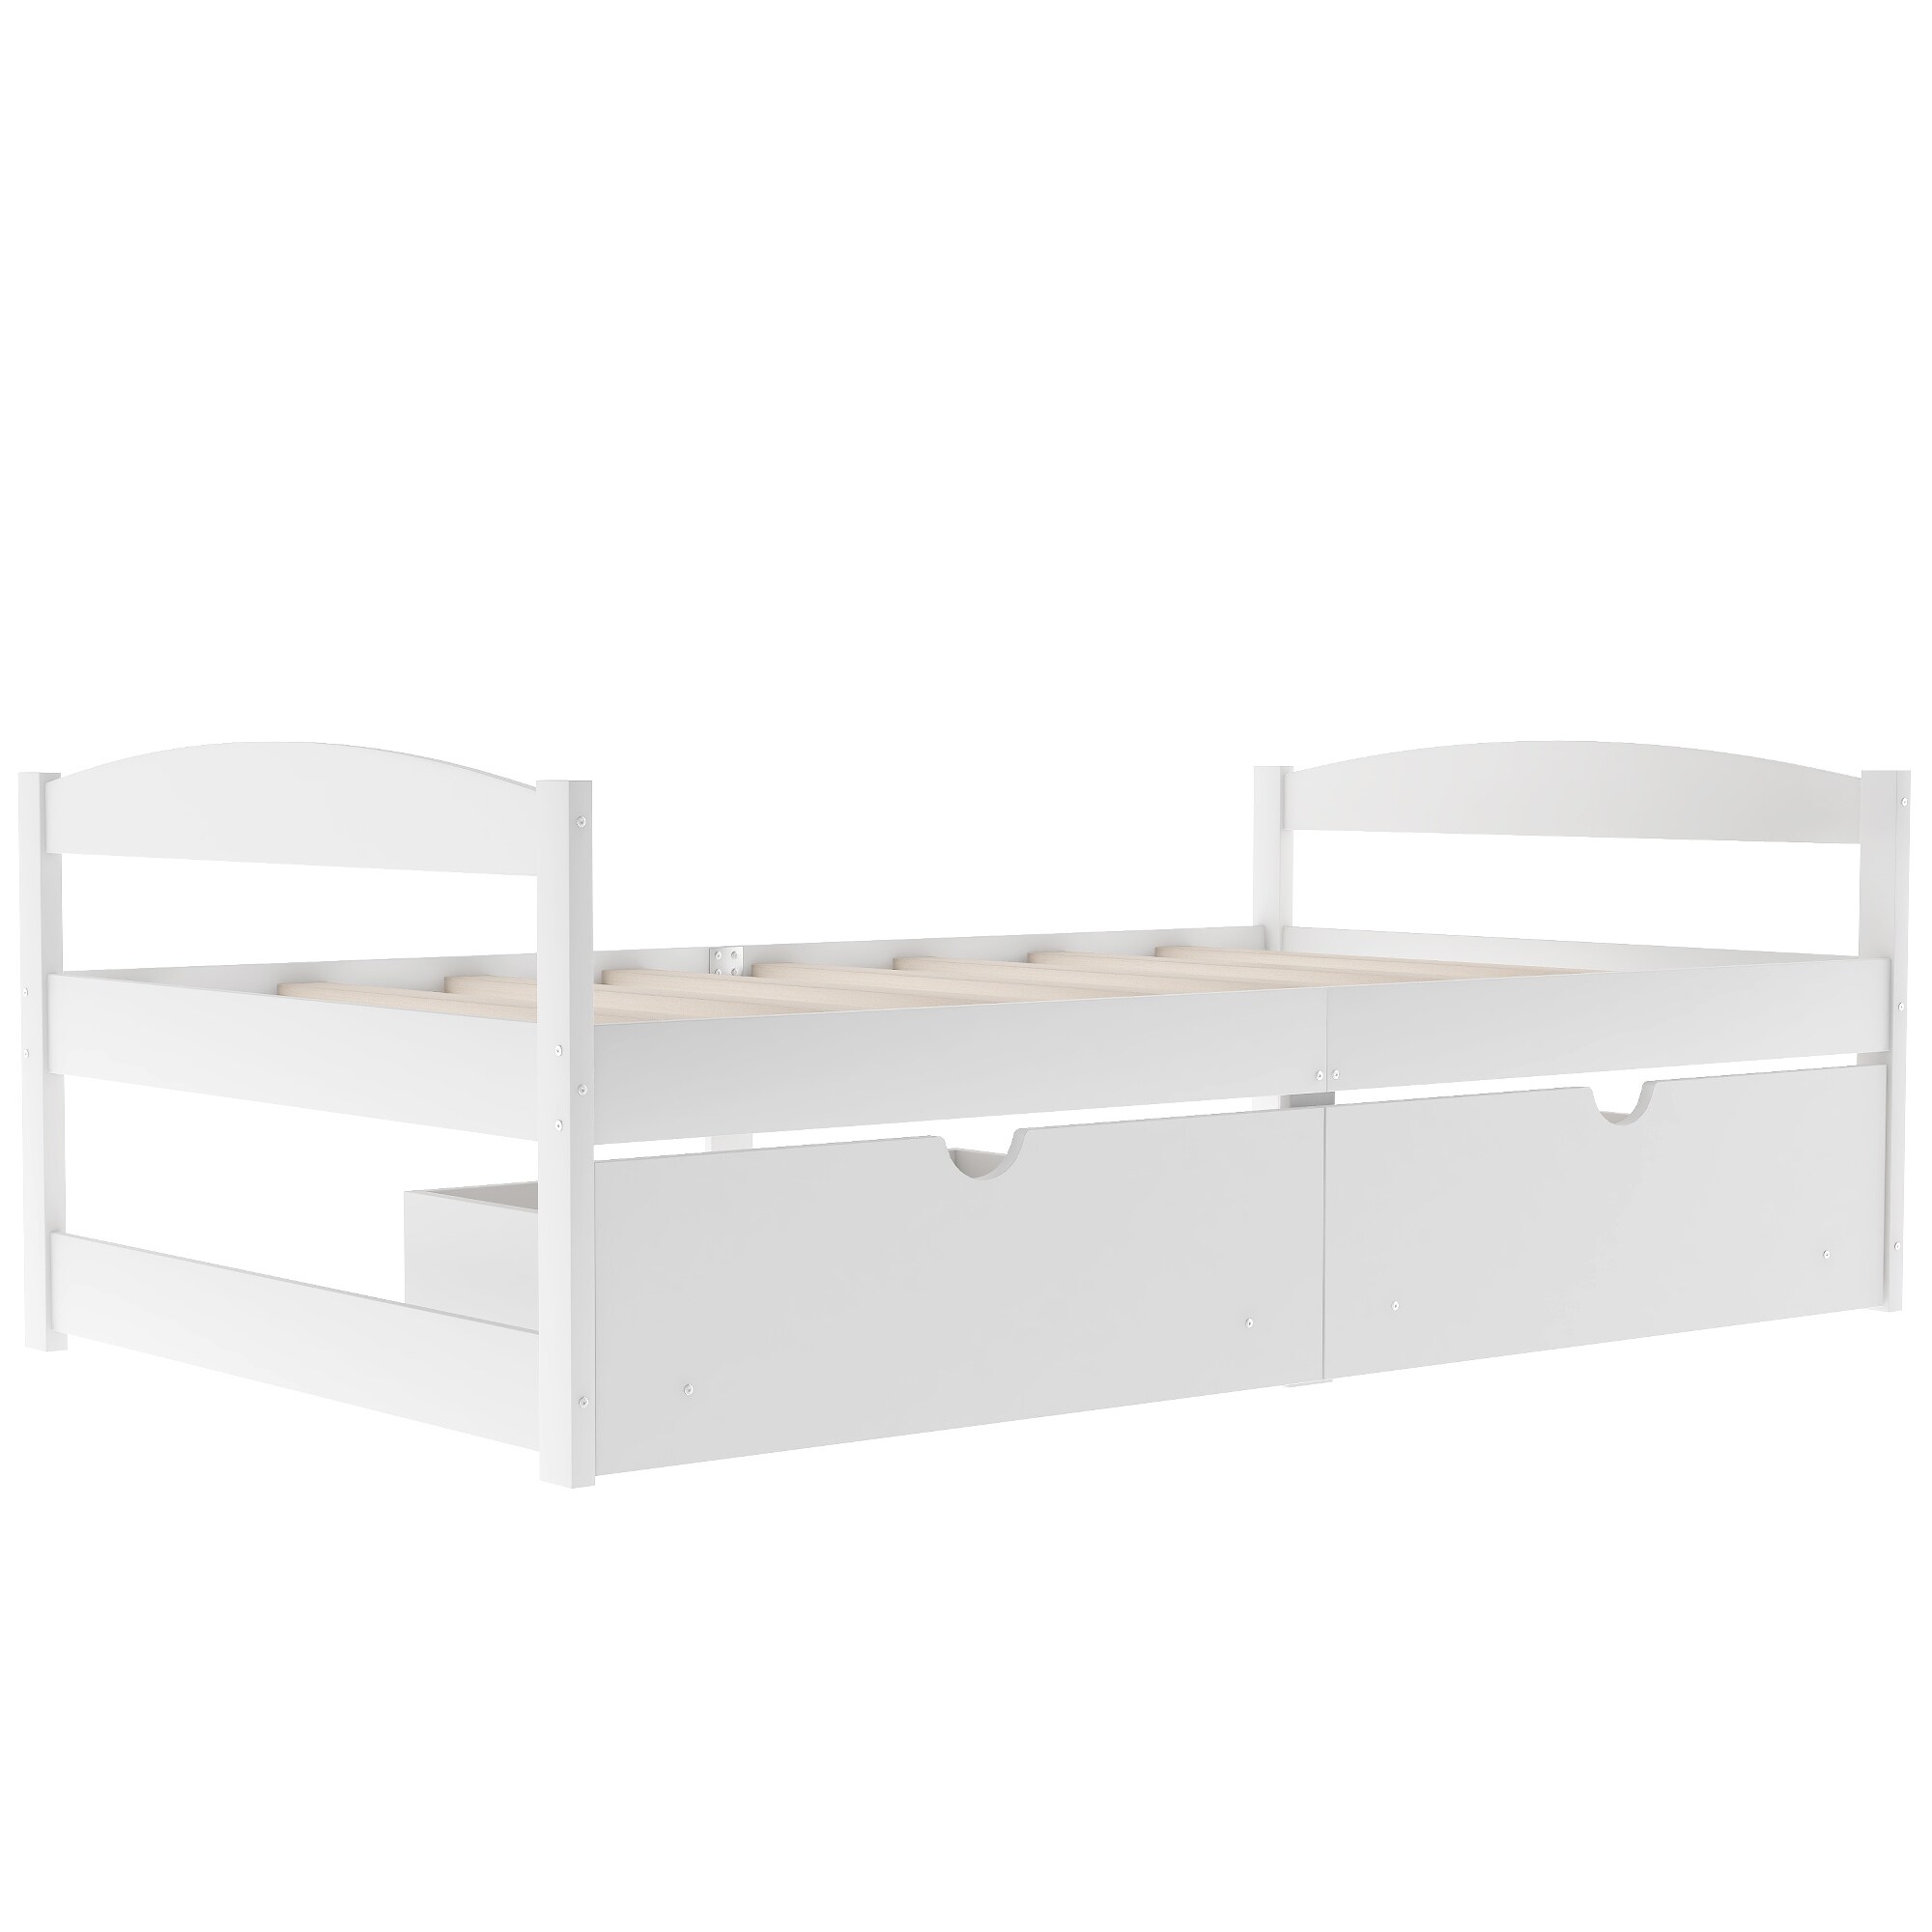 Haven Ga wandelen milieu CASAINC Twin size platform bed White Twin Contemporary Platform Bed with  Storage in the Beds department at Lowes.com